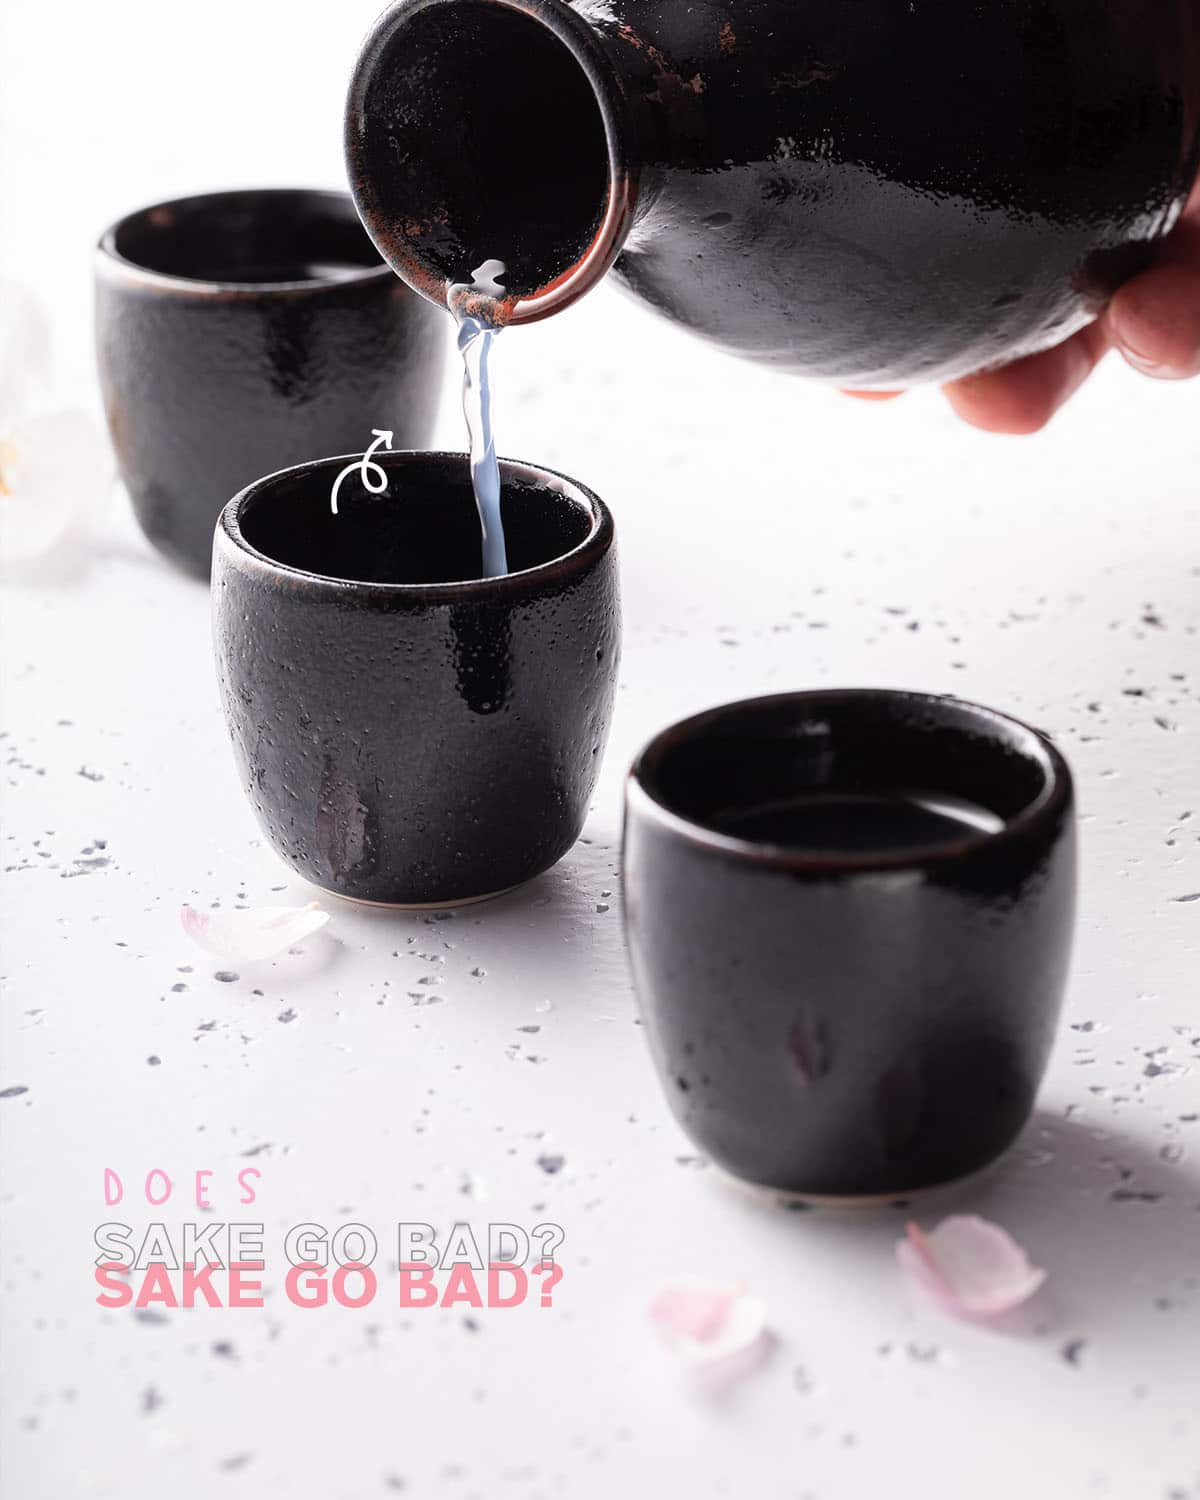 Sake is less likely to go bad if it is unopened. Long-term storage may affect the quality and might not be as good as once you opened it, but it will still be drinkable.